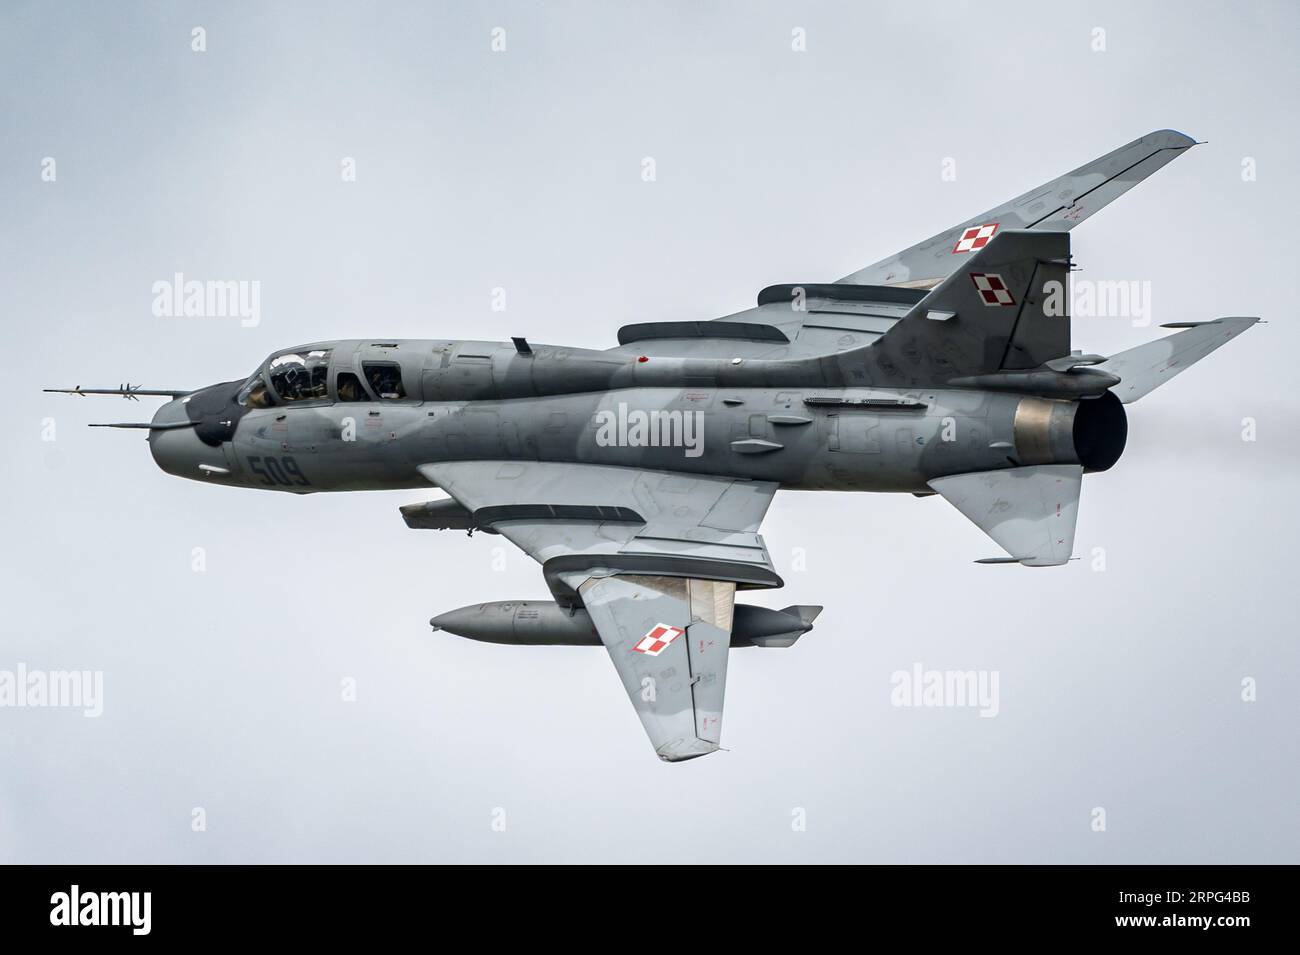 The Sukhoi Su-22 'Fitter' variable-sweep wing fighter-bomber of the Polish Air Force. Stock Photo